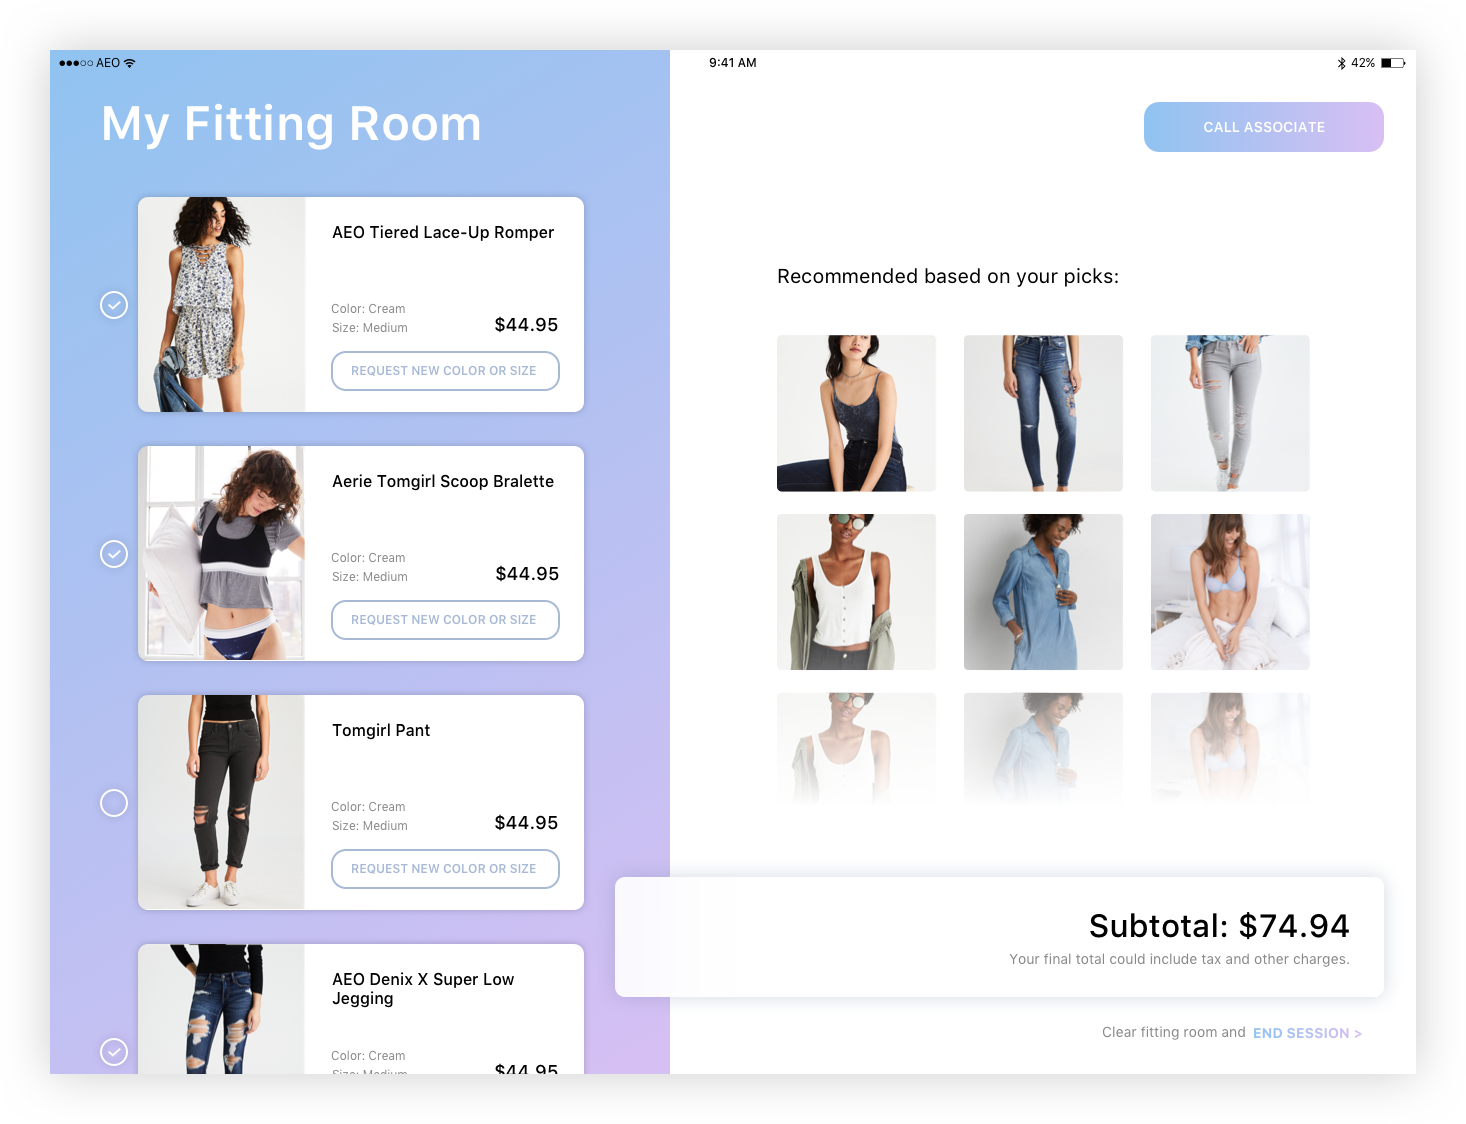  Explore vertical layout more similar to a checkout experience. More room to display “inspire“ type of content. Added prominence to main CTA. 